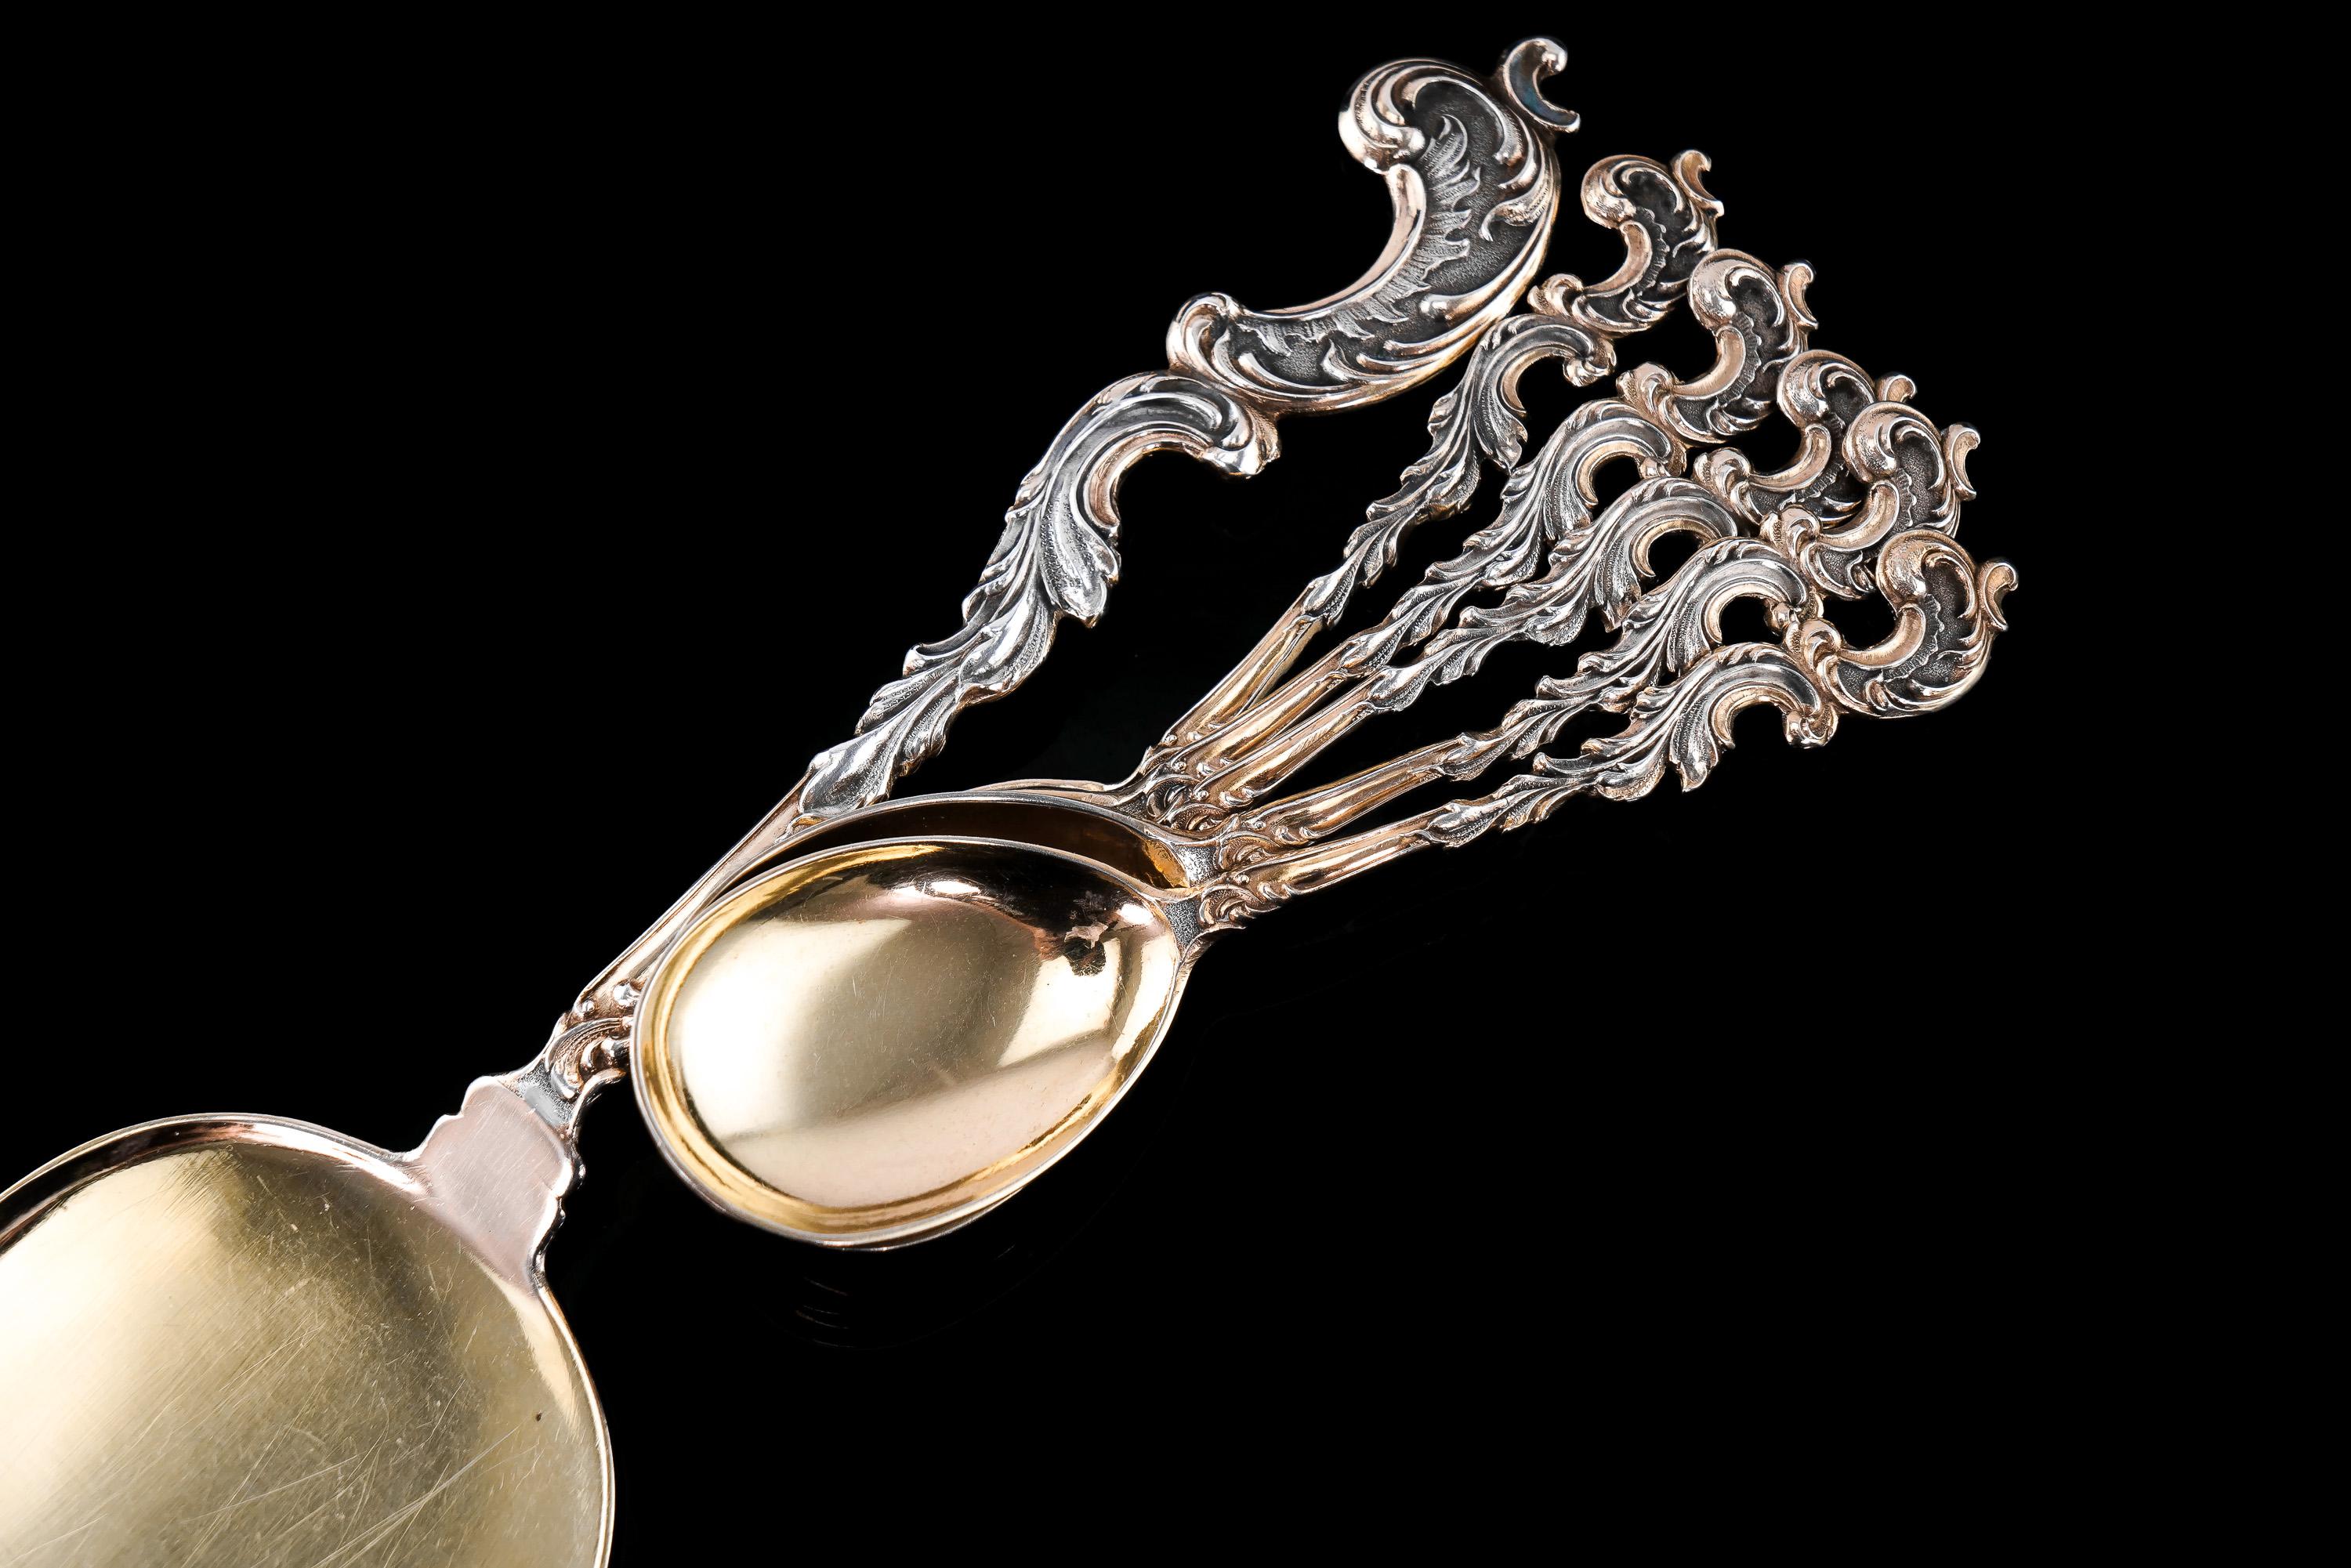 Antique German Solid Silver Icecream Server & Spoons in Rococo Style - c.1900 For Sale 9